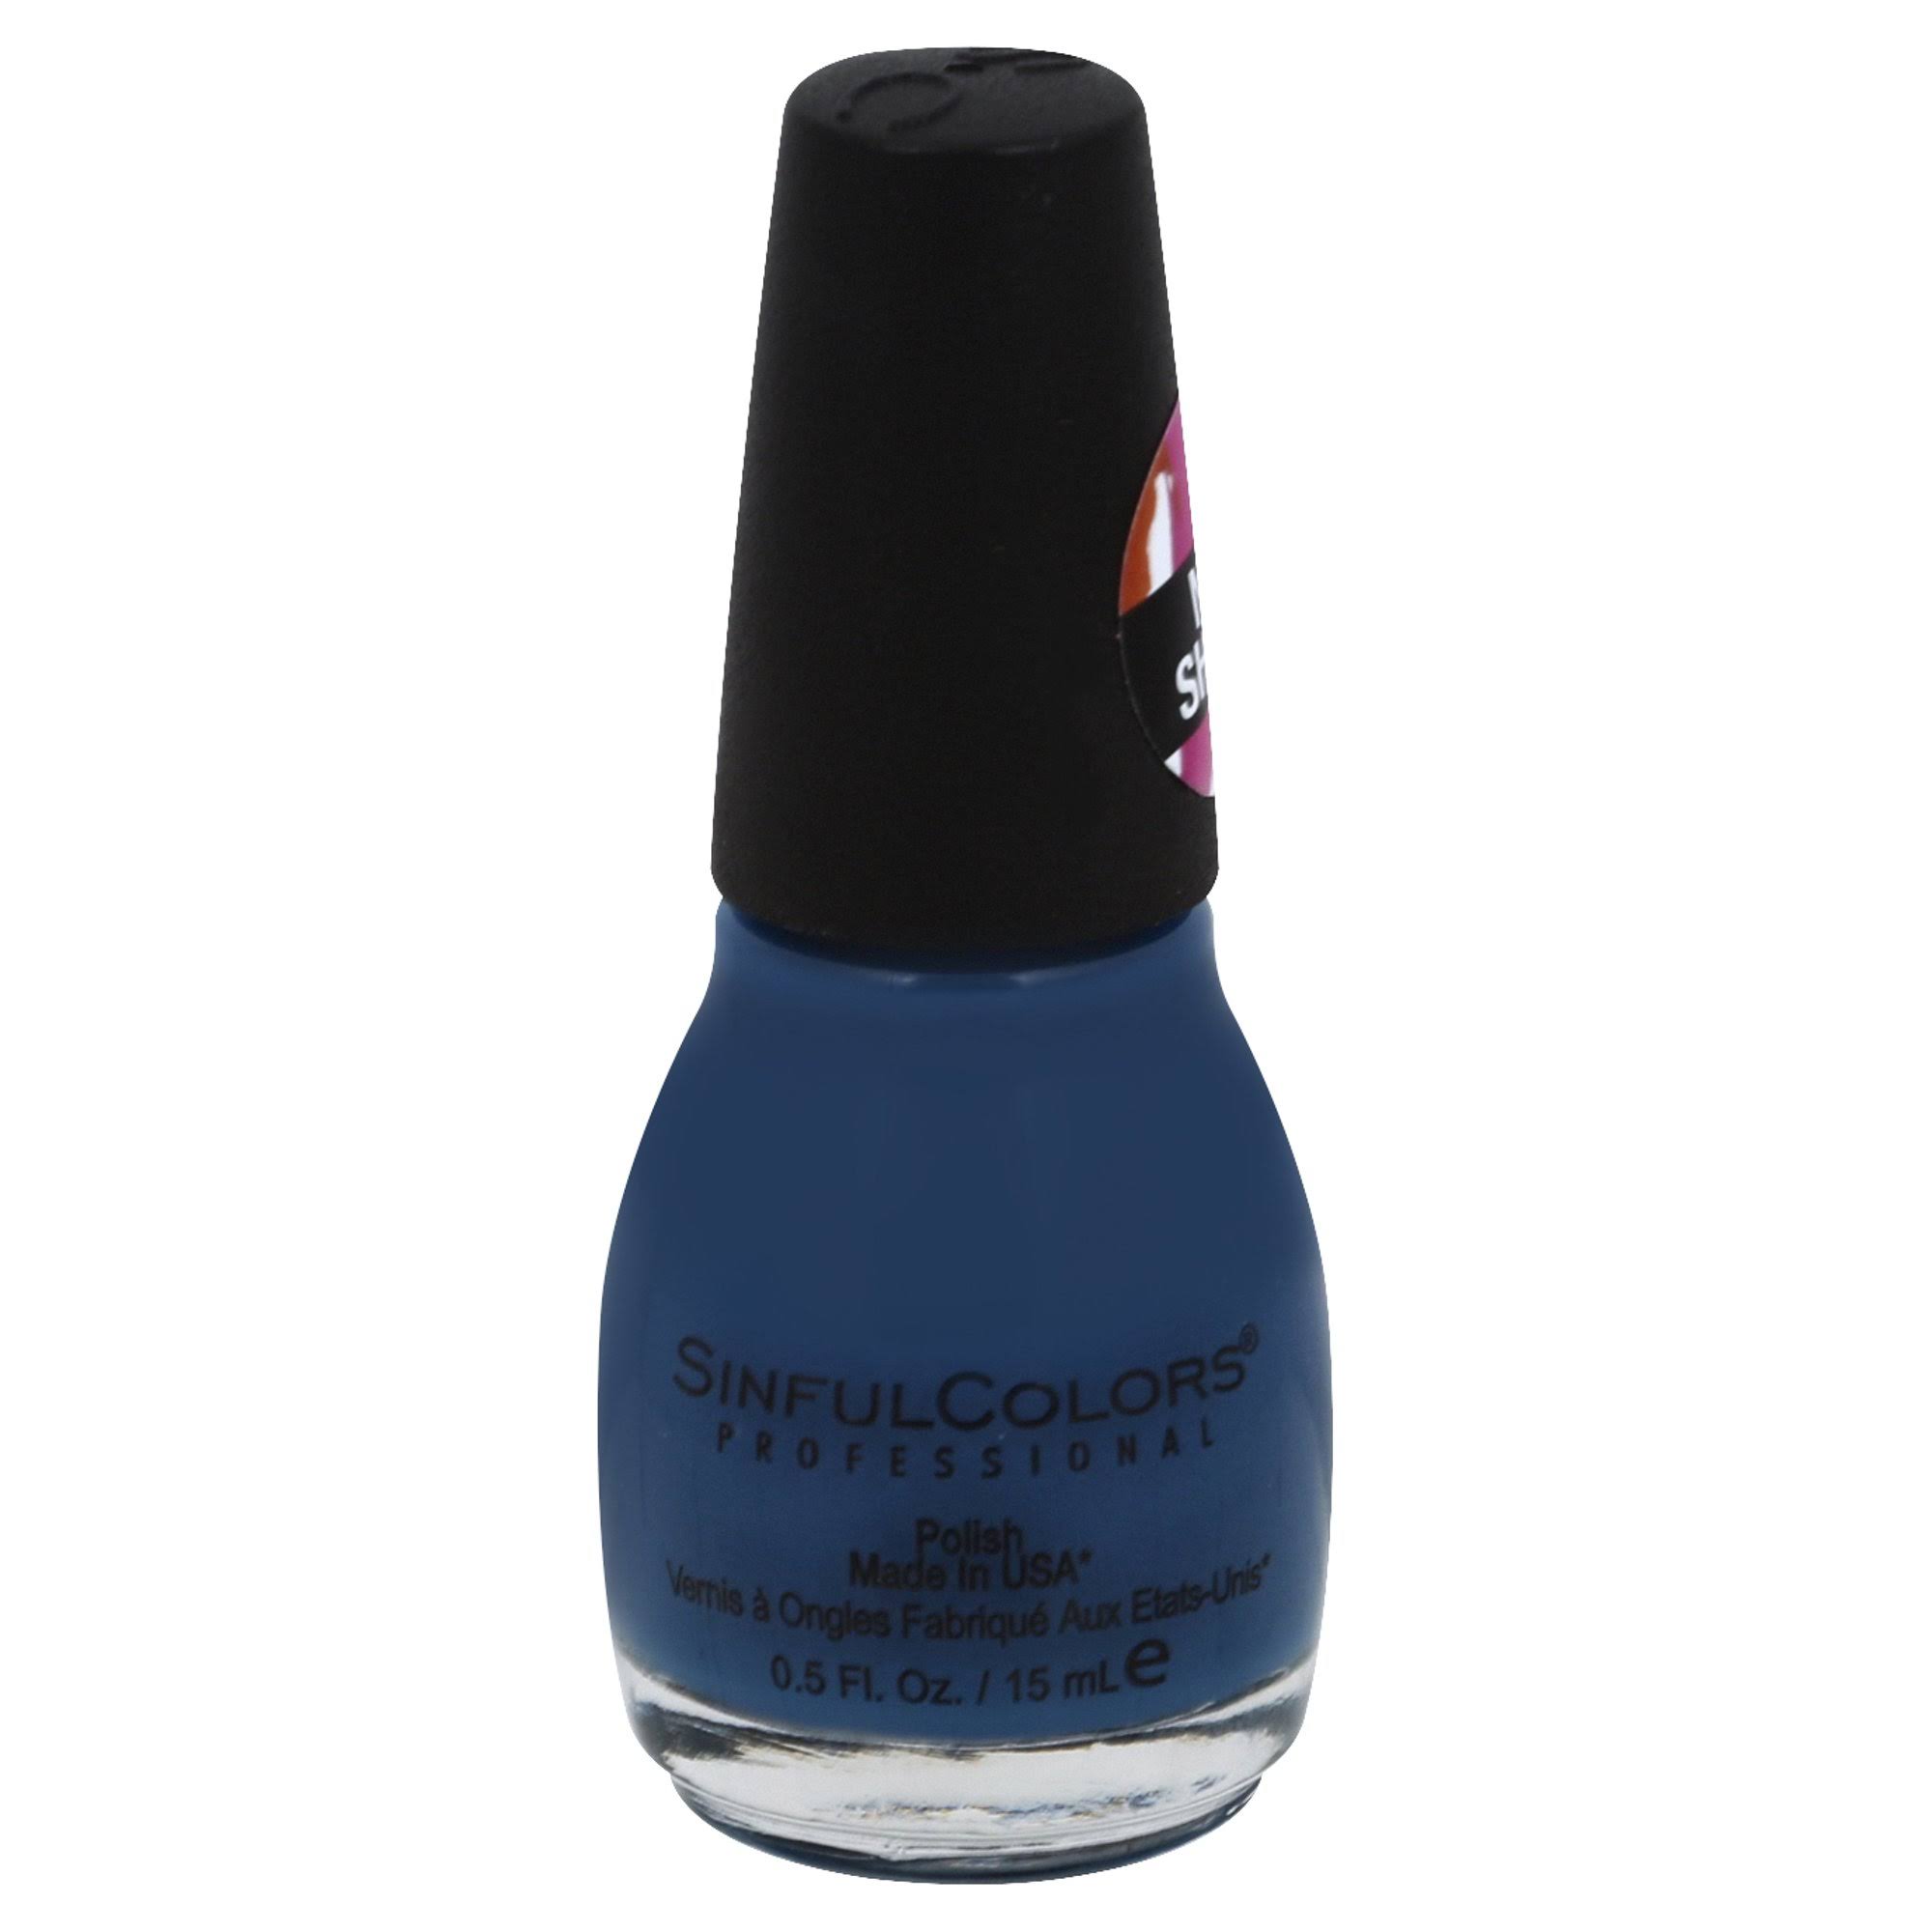 SinfulColors Professional Polish, Show and Teal 2543 - 0.5 fl oz